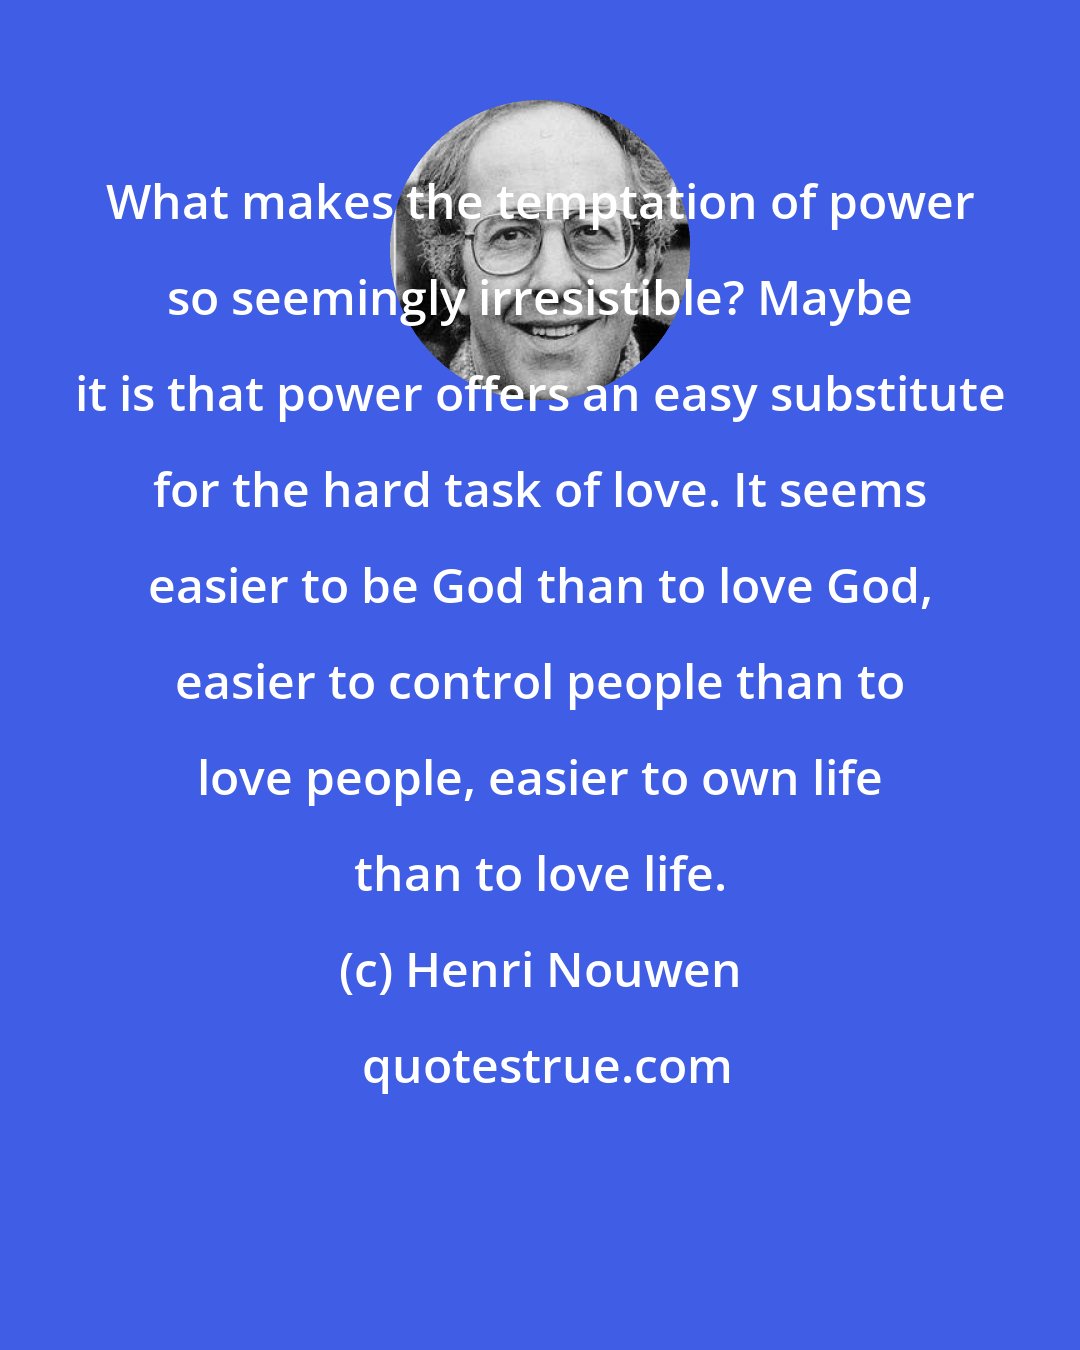 Henri Nouwen: What makes the temptation of power so seemingly irresistible? Maybe it is that power offers an easy substitute for the hard task of love. It seems easier to be God than to love God, easier to control people than to love people, easier to own life than to love life.